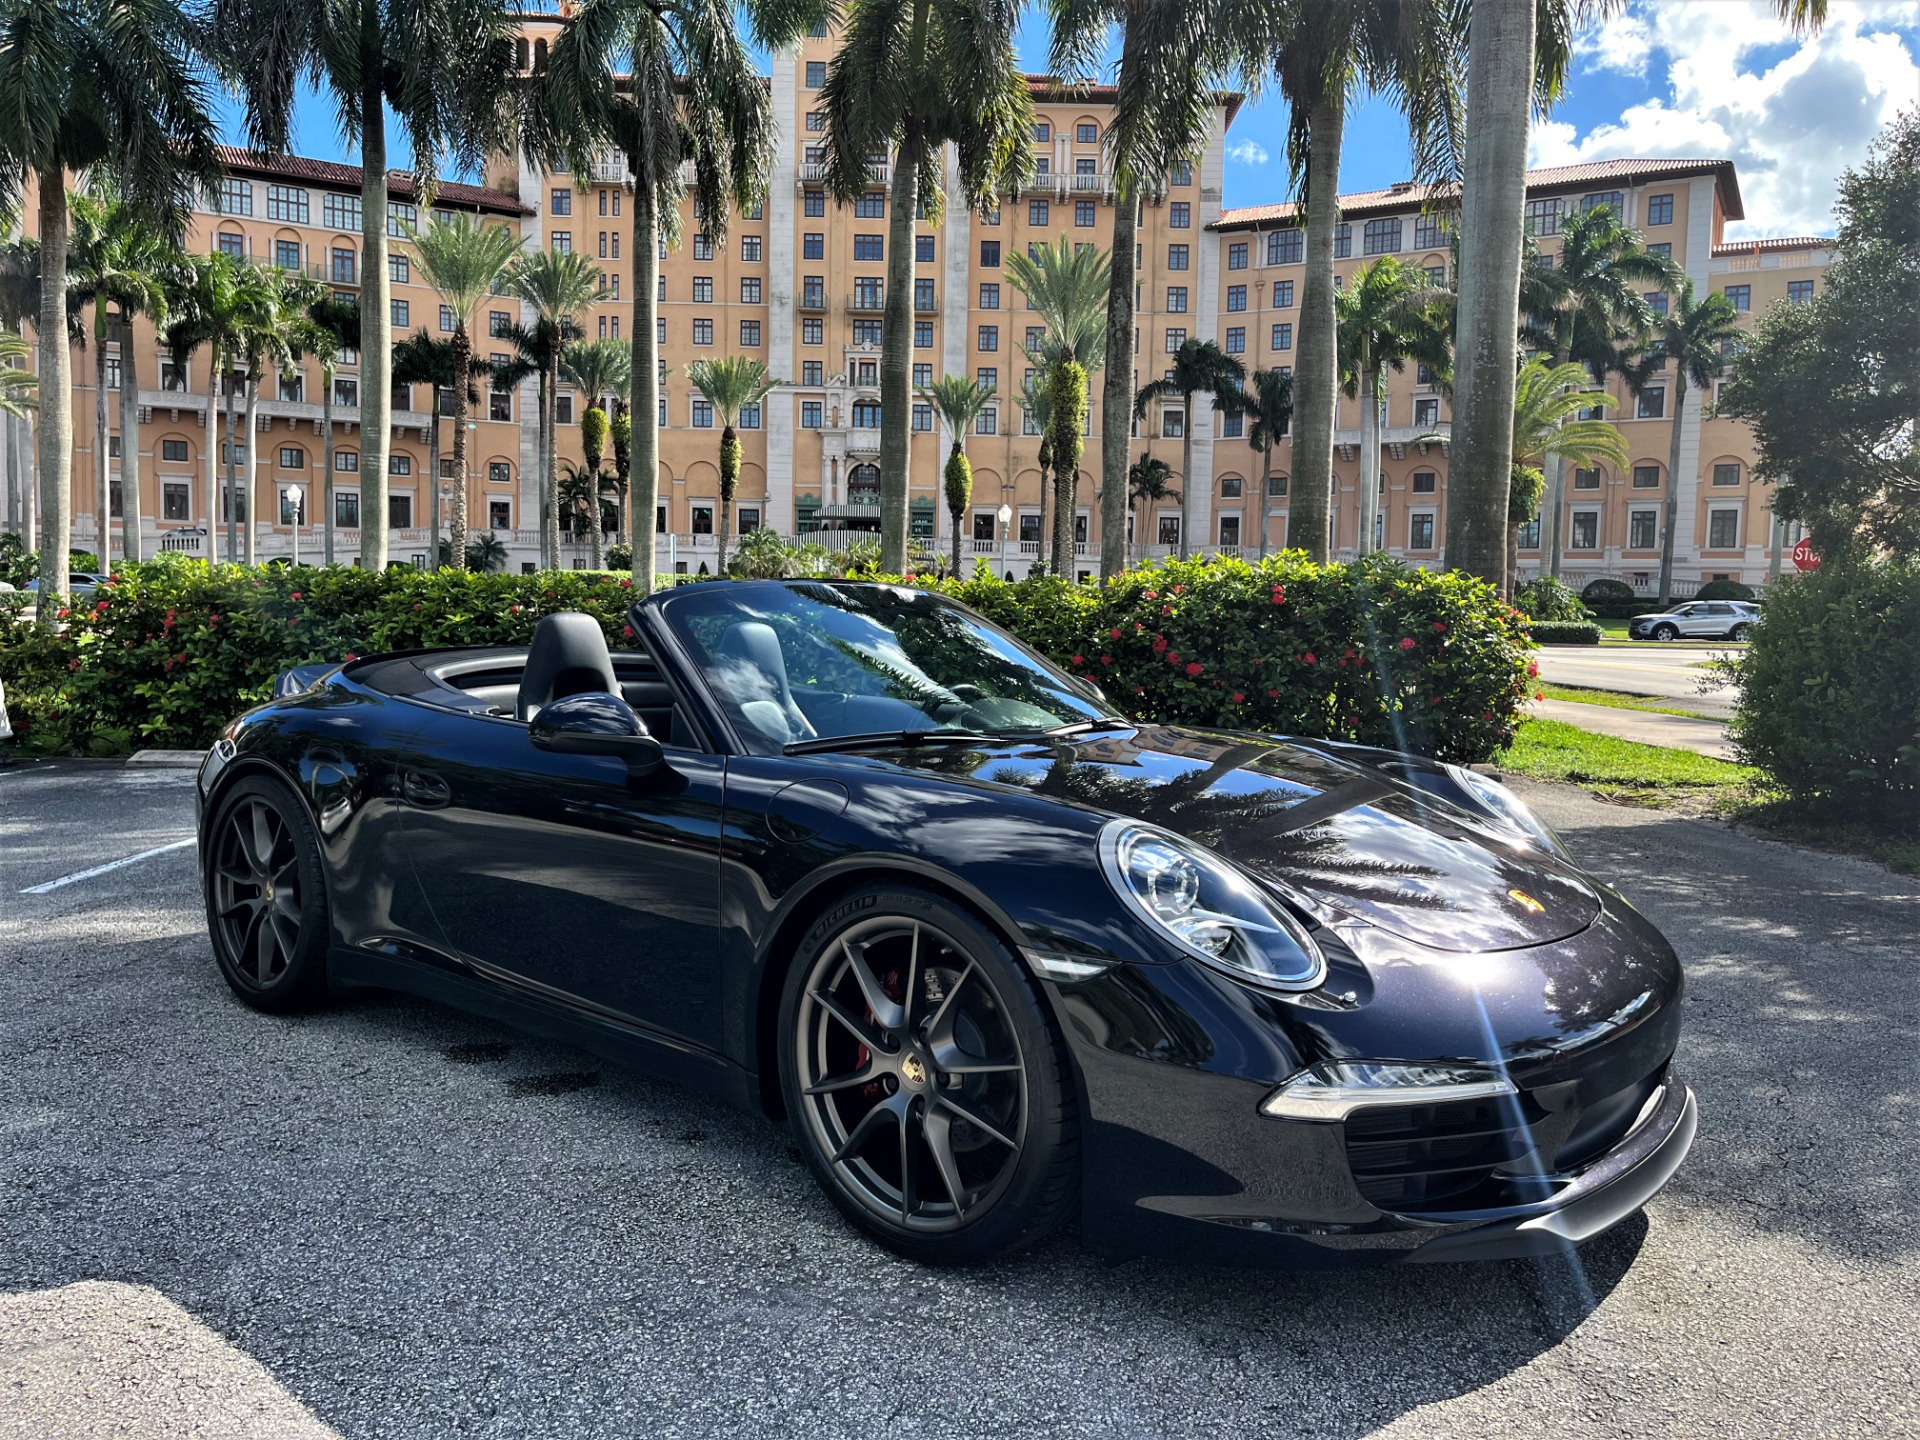 Used 2013 Porsche 911 Carrera for sale Sold at The Gables Sports Cars in Miami FL 33146 1